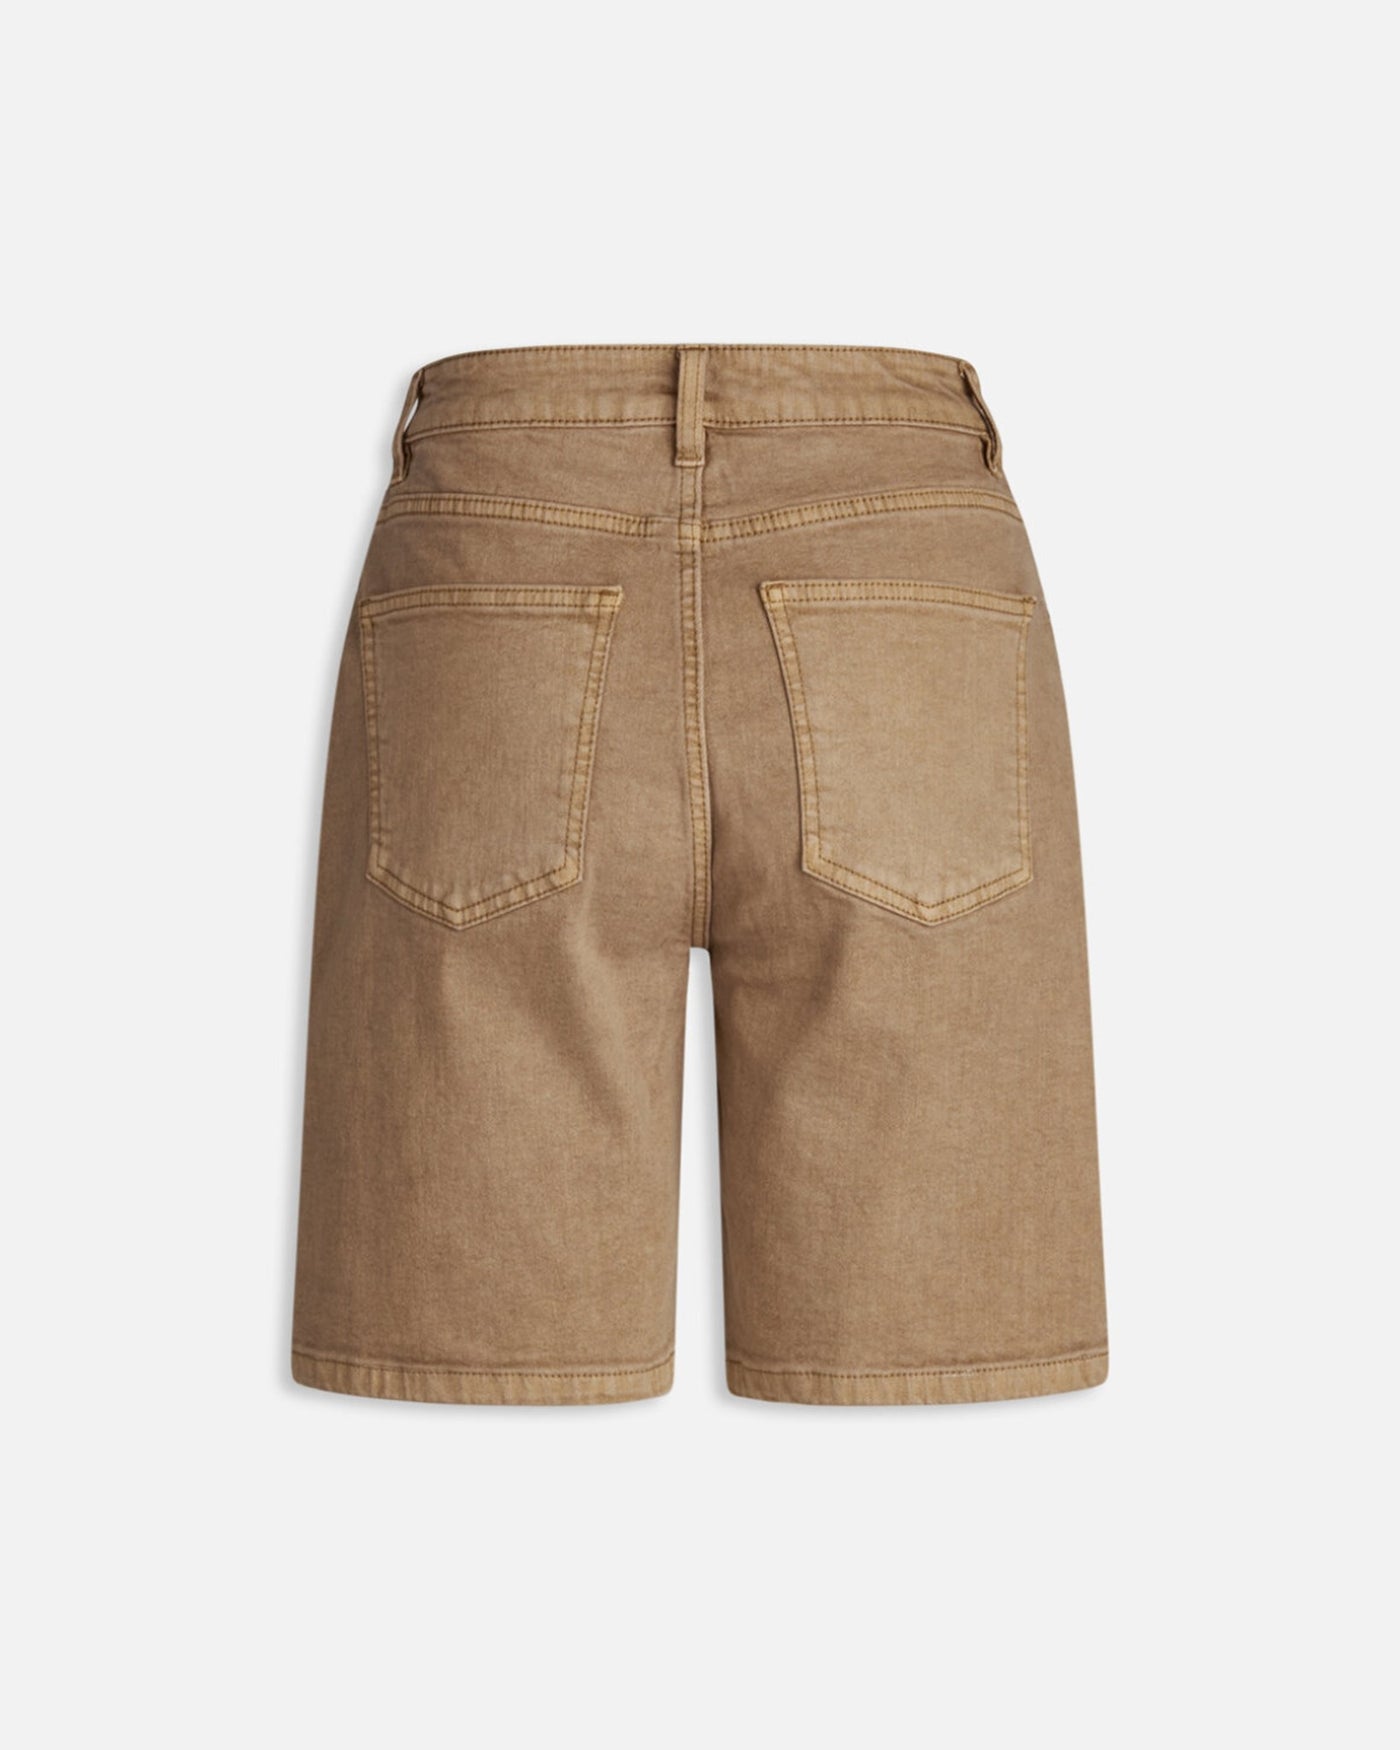 Owi Shorts - Sand - Sisters Point - Sand/Beige 6